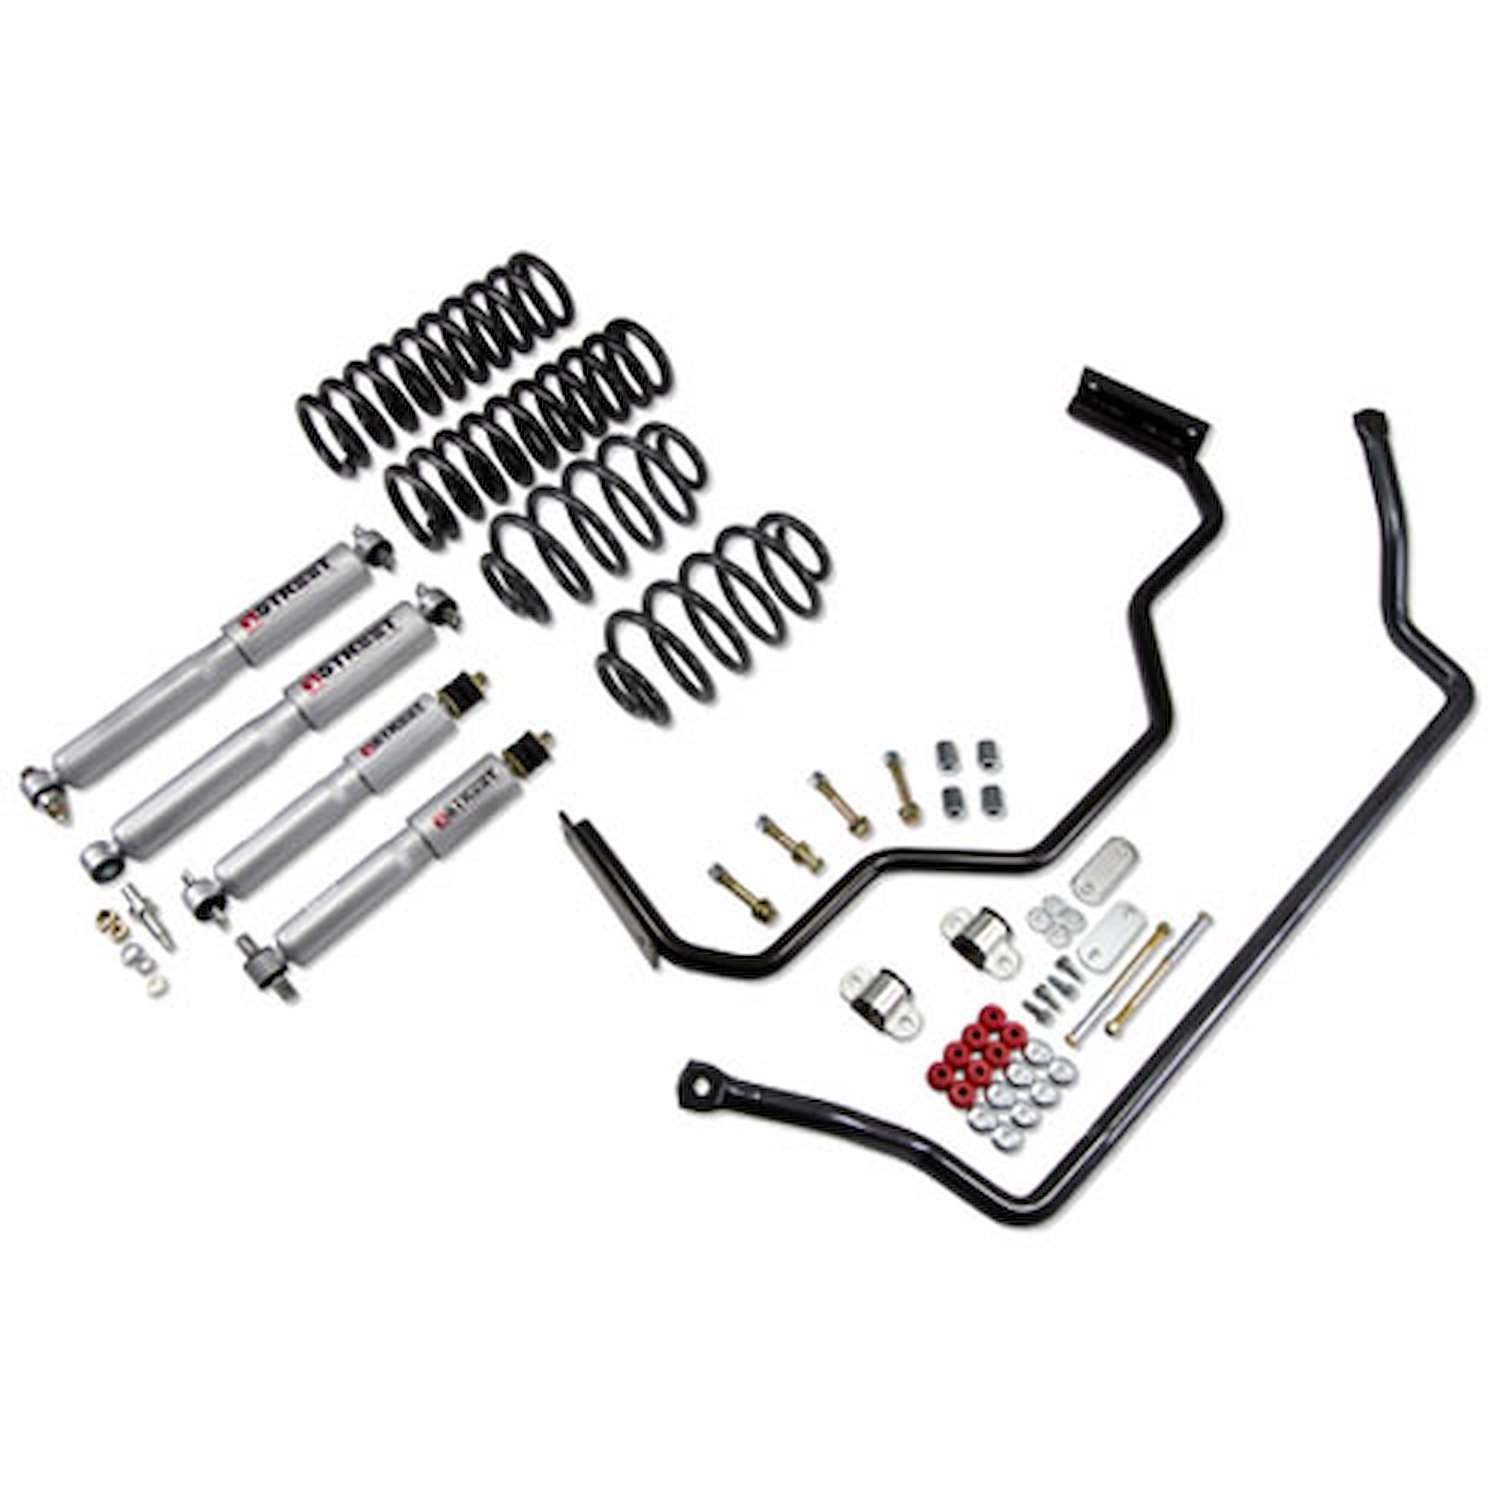 Muscle Car Suspension Kit for 1968-1972 Chevy El Camino